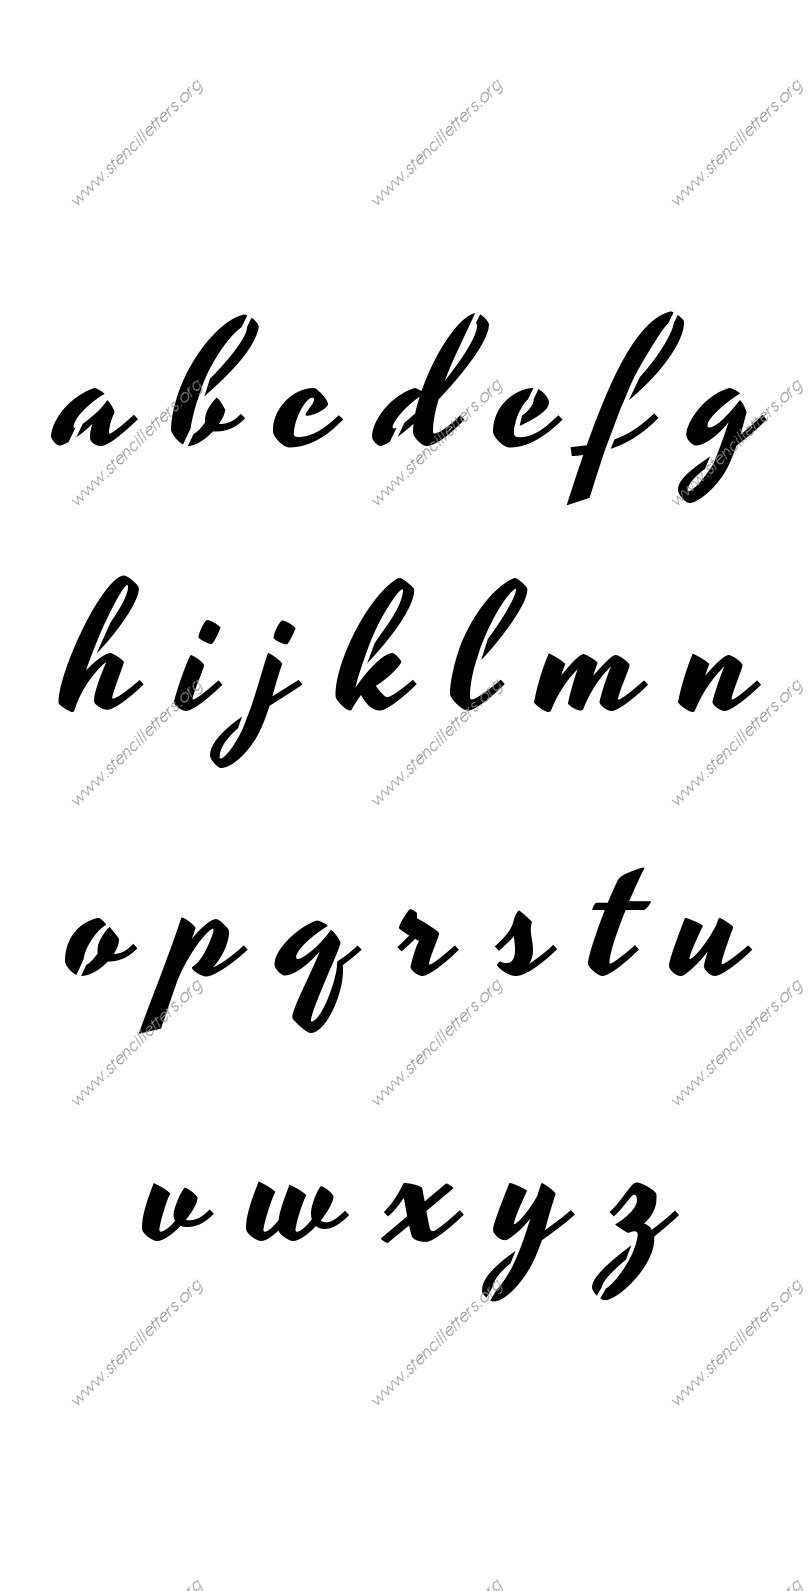 1940s Brushed Cursive A to Z lowercase letter stencils